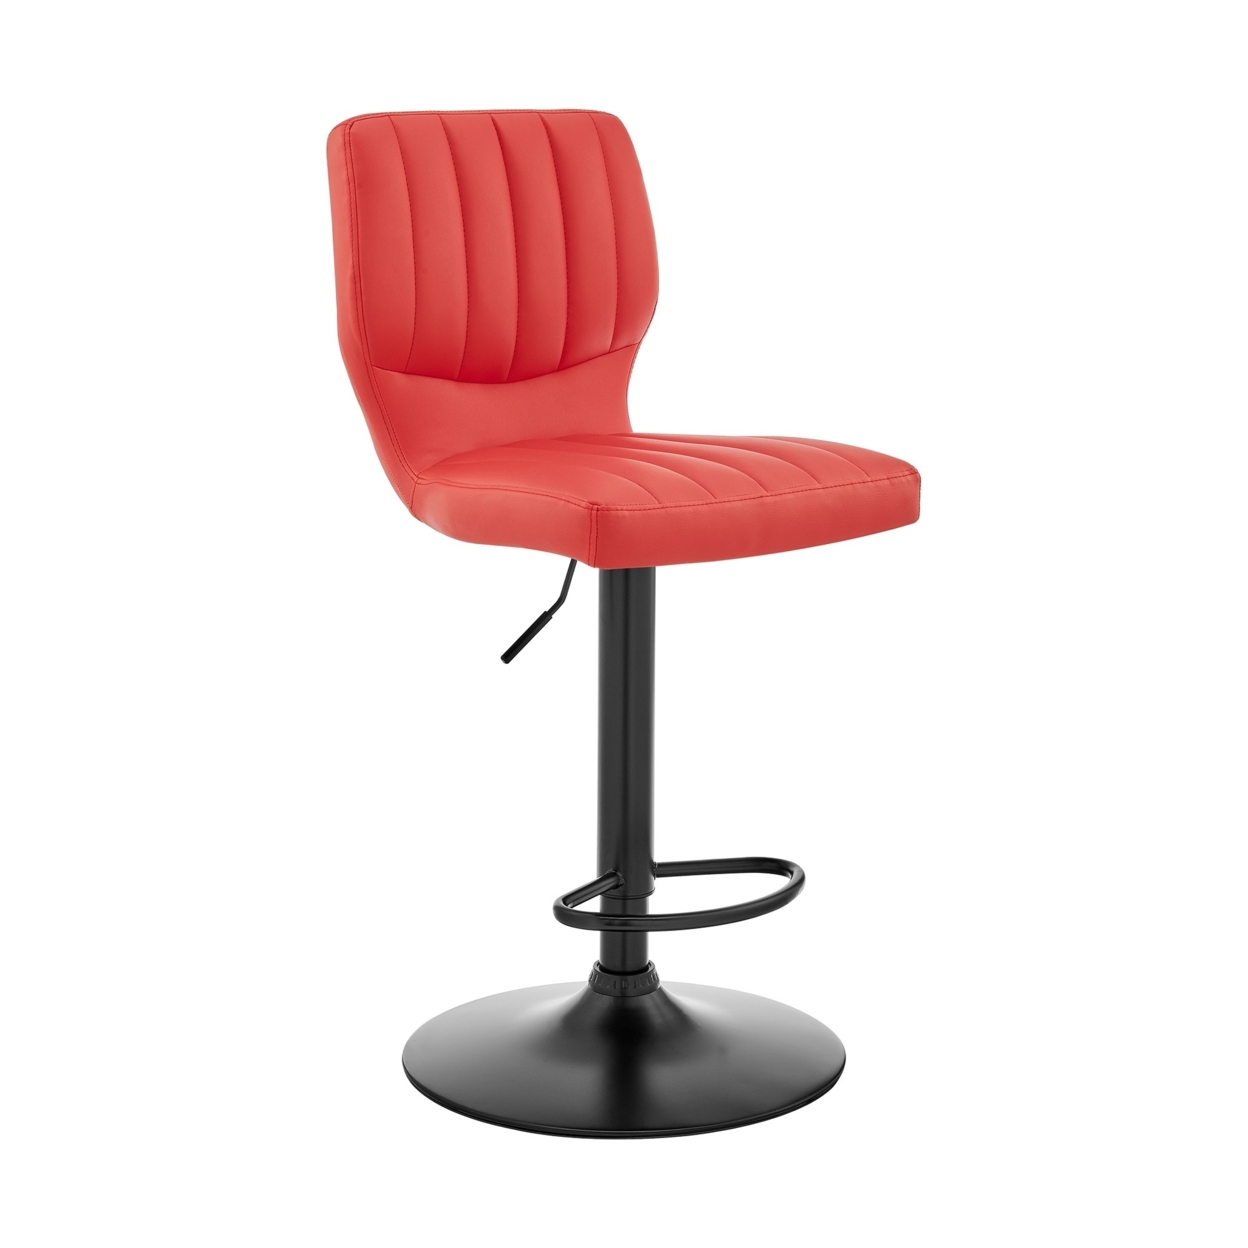 21 Inch Metal And Leatherette Swivel Bar Stool, Black And Red- Saltoro Sherpi